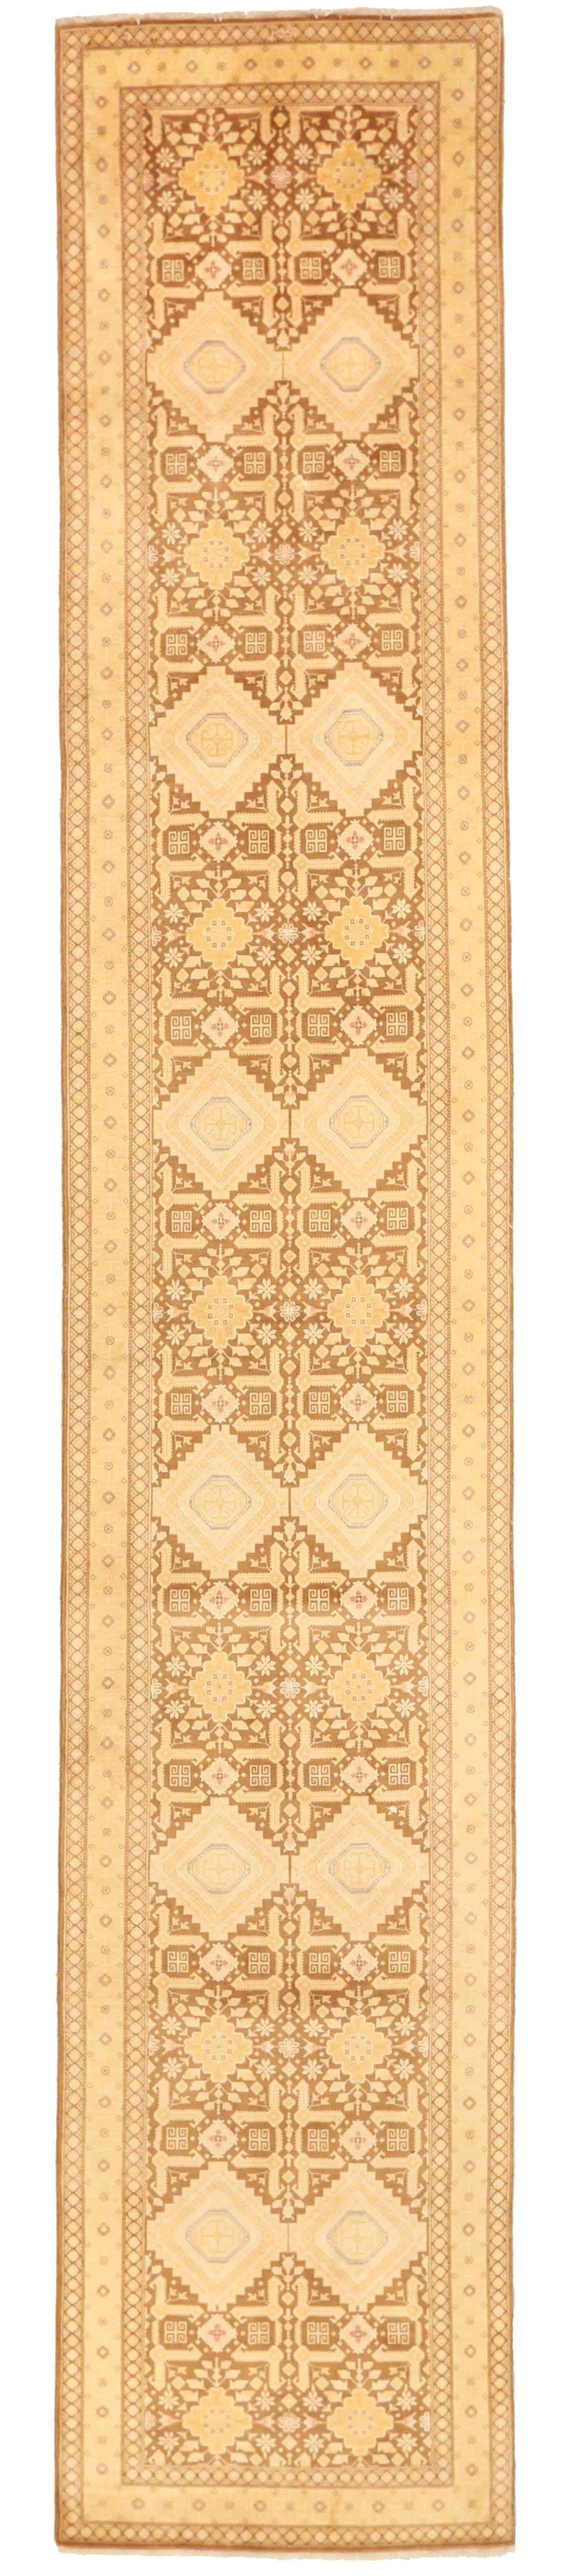 Antique Persian rug handcrafted in the 1940s using fine weaving knots to highlight its intricate Tabriz design patterns. It has a simple but elegant gold and brown color motif that matches well with modern and contemporary home designs. This antique